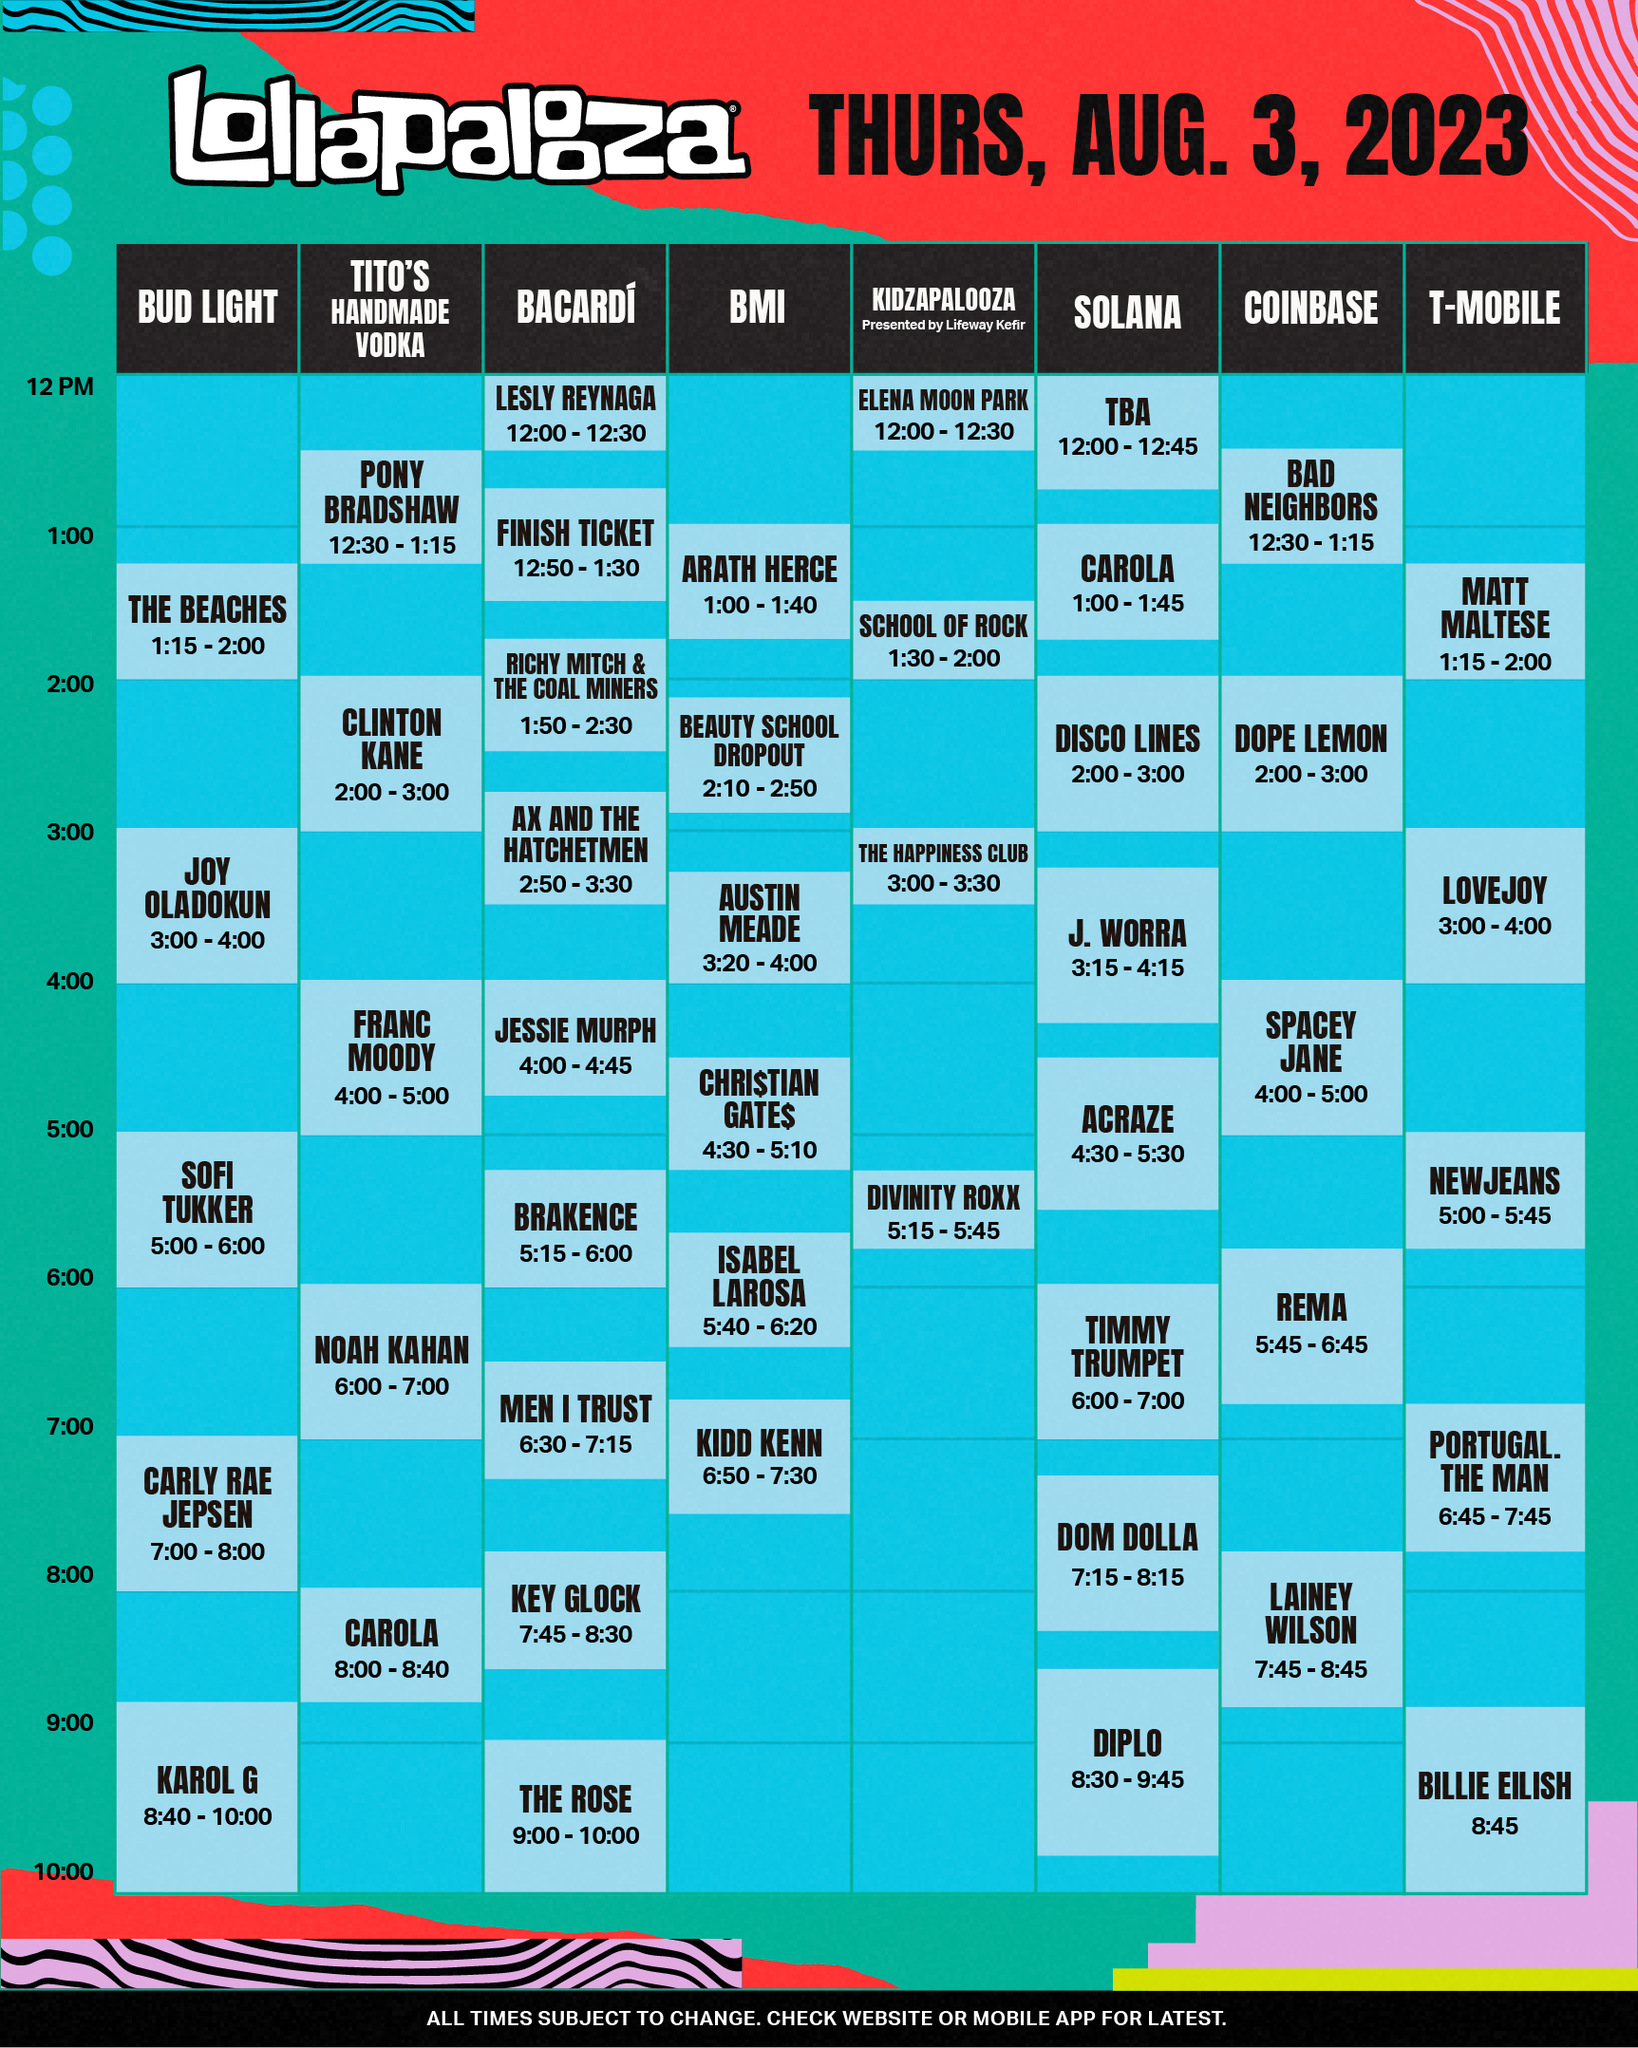 2023 Lollapalooza Schedule Announced! 1